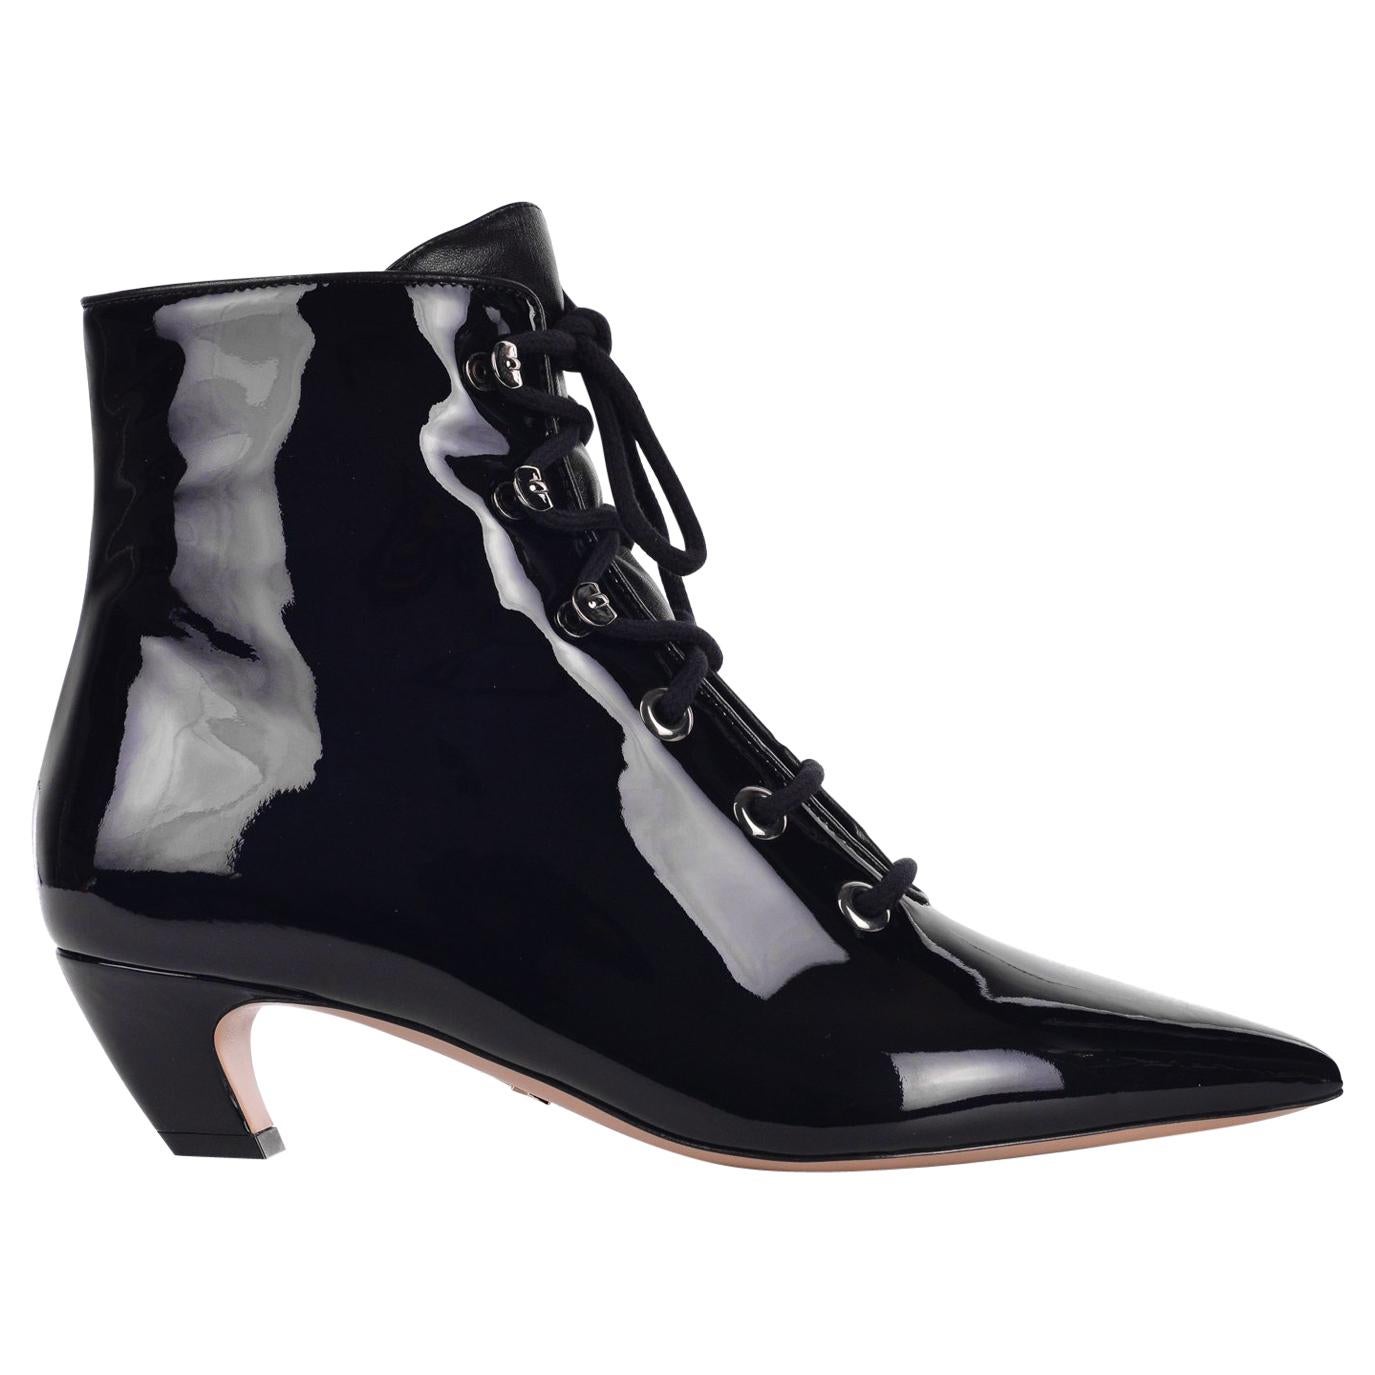 Dior Women's I-Dior Black Patent Leather Lace Up Boots For Sale